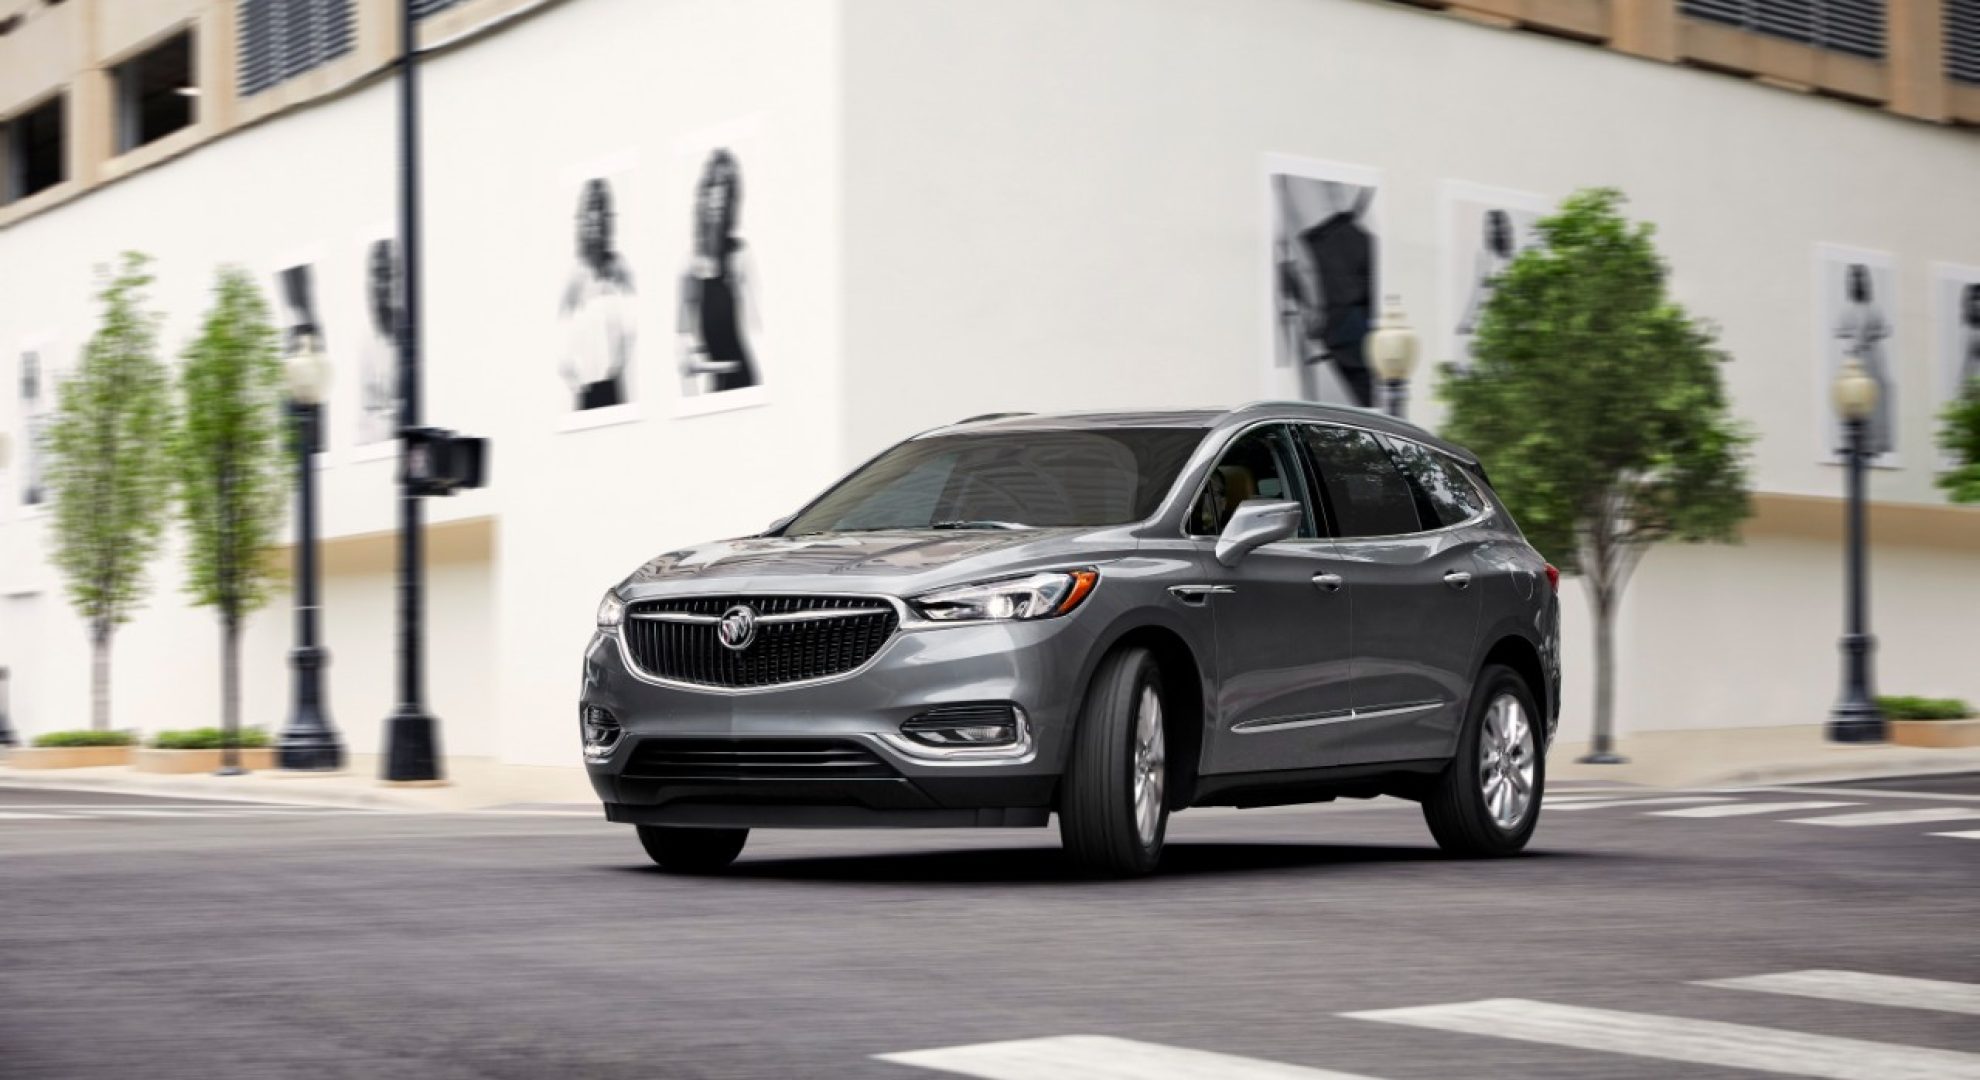 2021_BUICK_ENCLAVE_FRONTVIEW